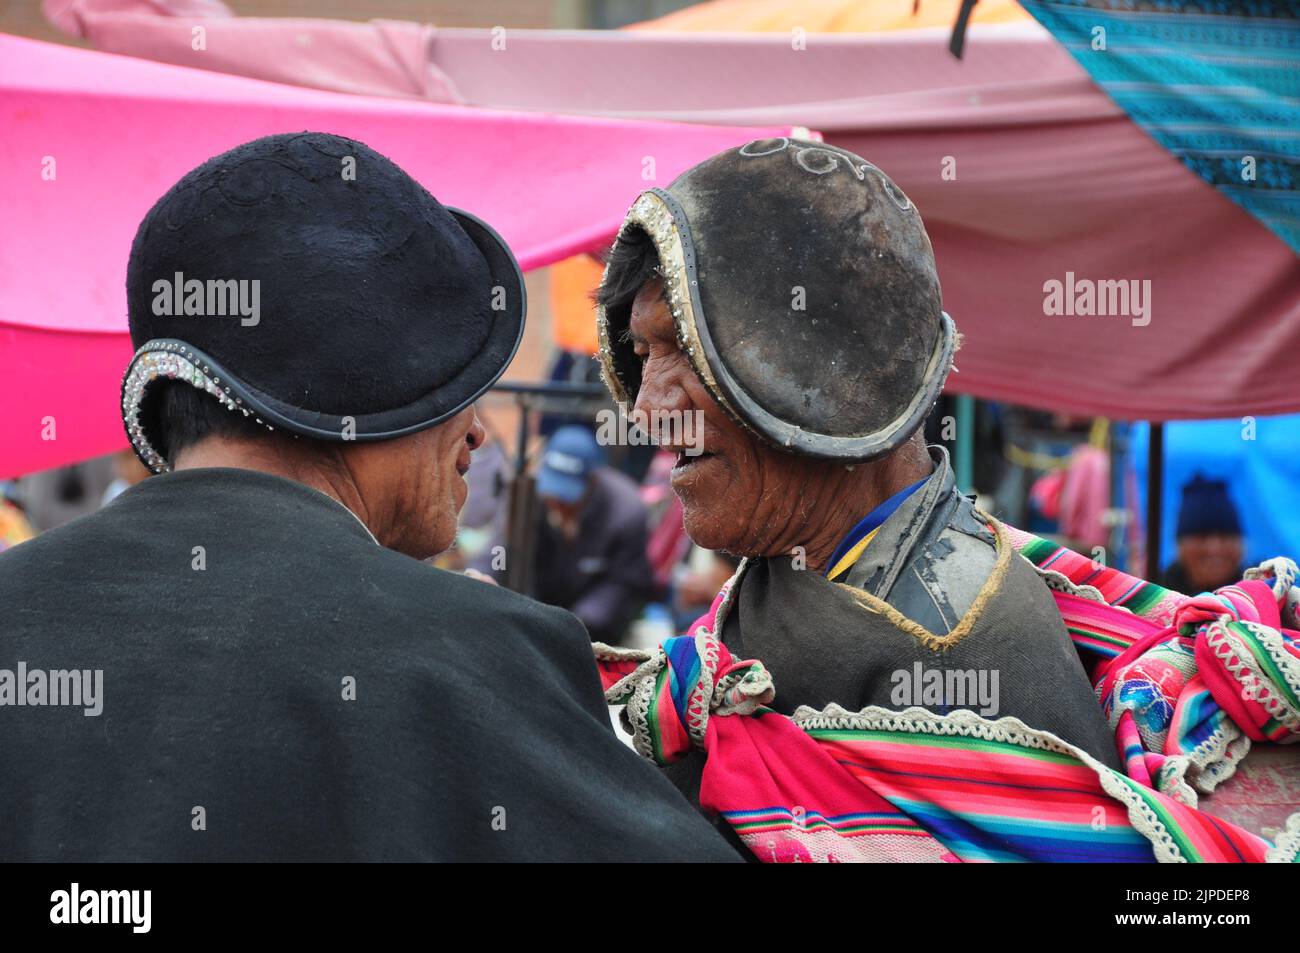 People at a market in in Bolivia Stock Photo